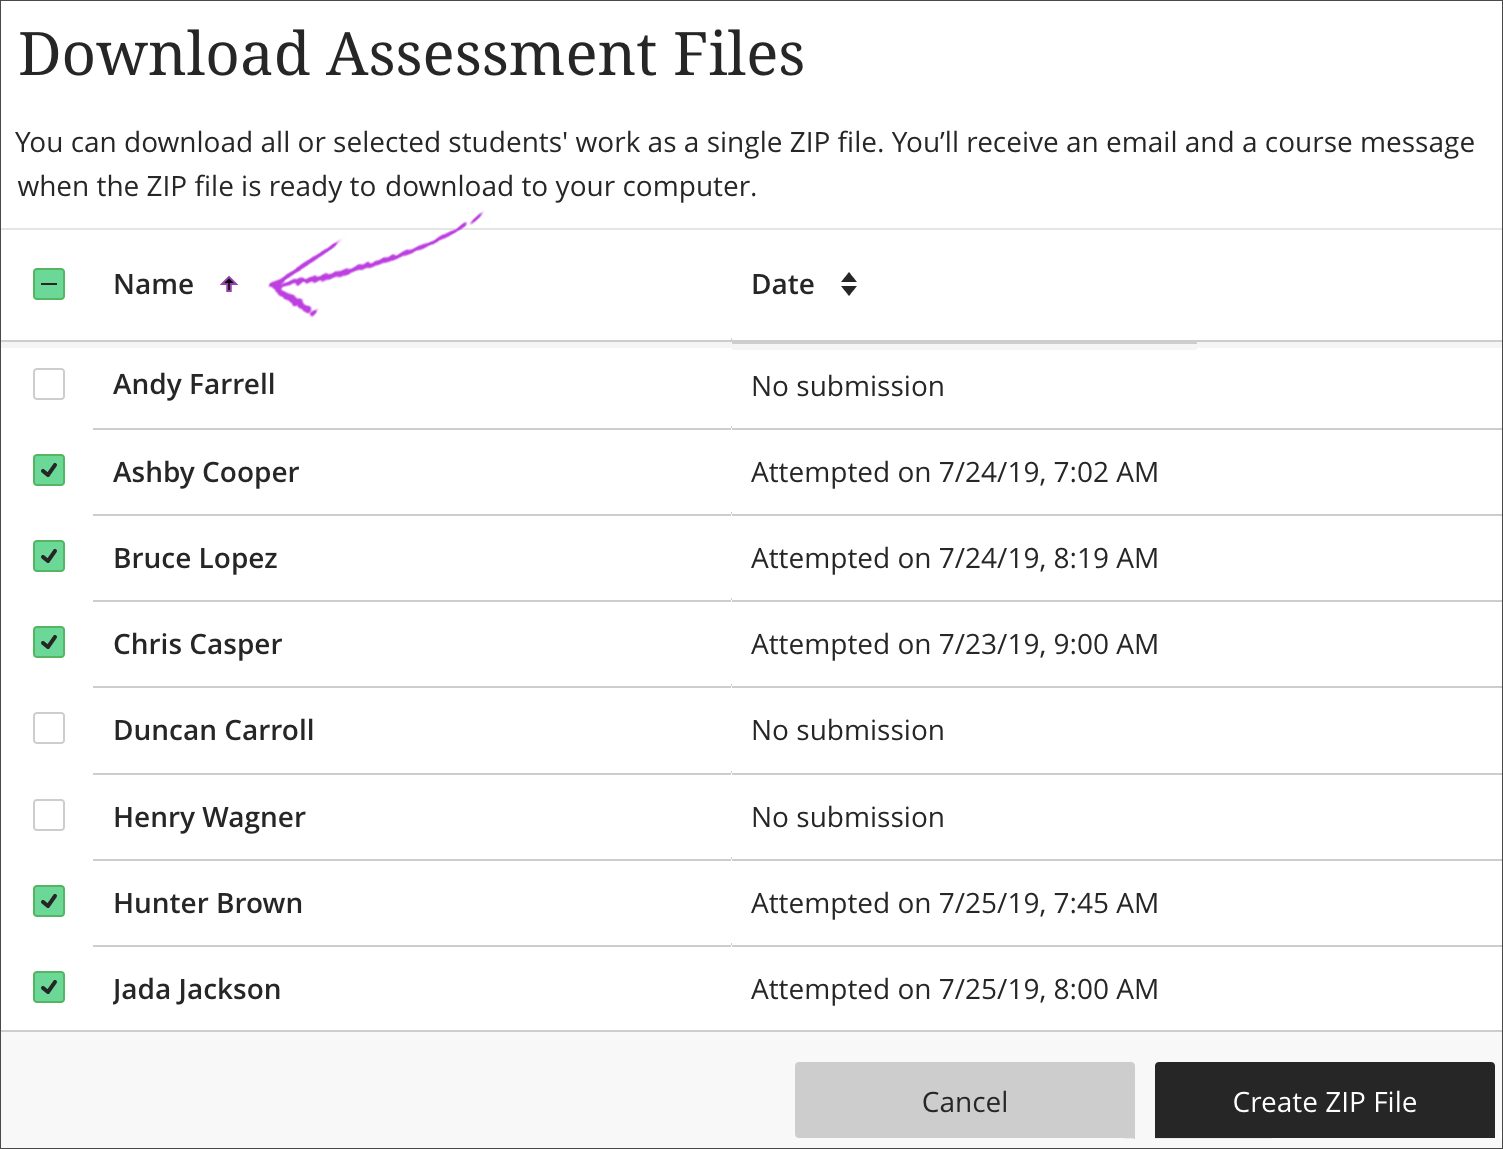 The Download Assessment Files page is open with the checkbox next to the "Name" column clicked and highlighted. The checkbox next to the names of the students who submitted their assessments are selected too.